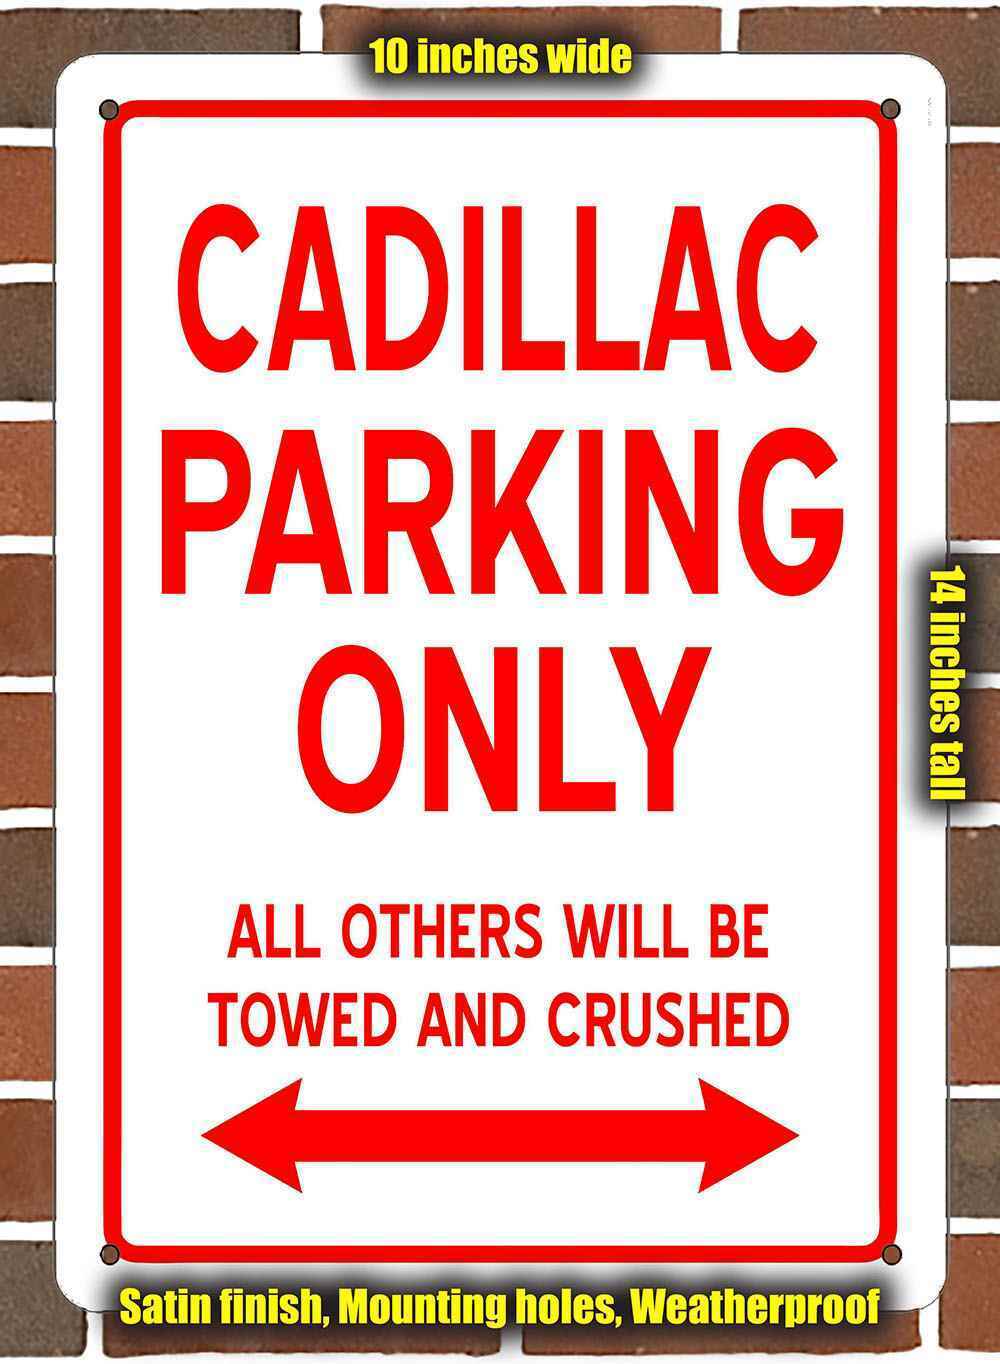 Metal Sign - CADILLAC PARKING ONLY- 10x14 inches